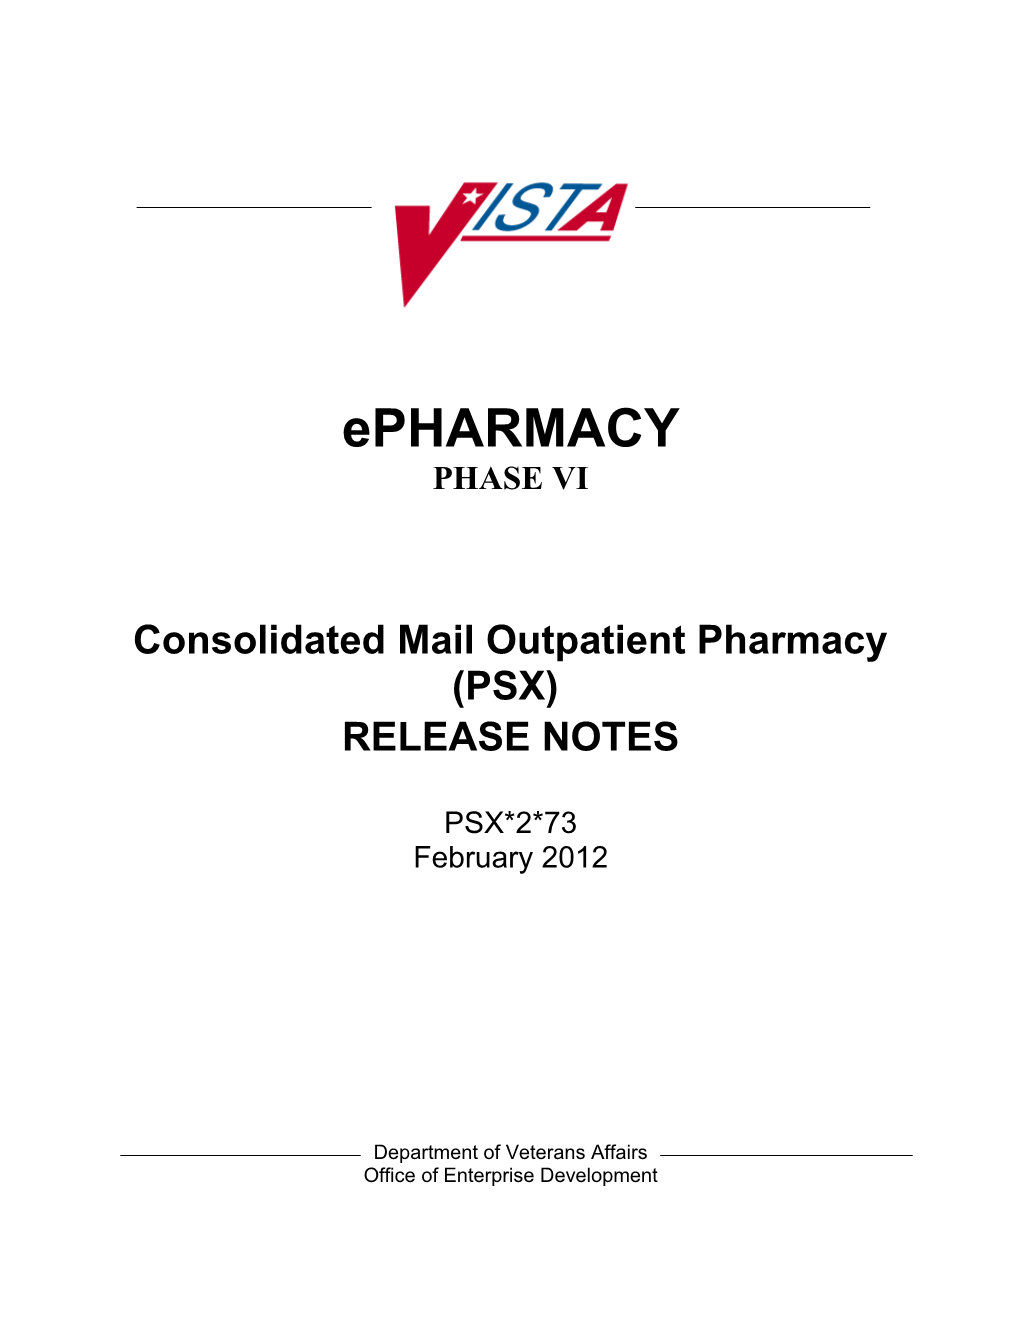 Department of Veterans Affairs Consolidated Mail Outpatient Pharmacy V. 2 Patch 73 Release Notes